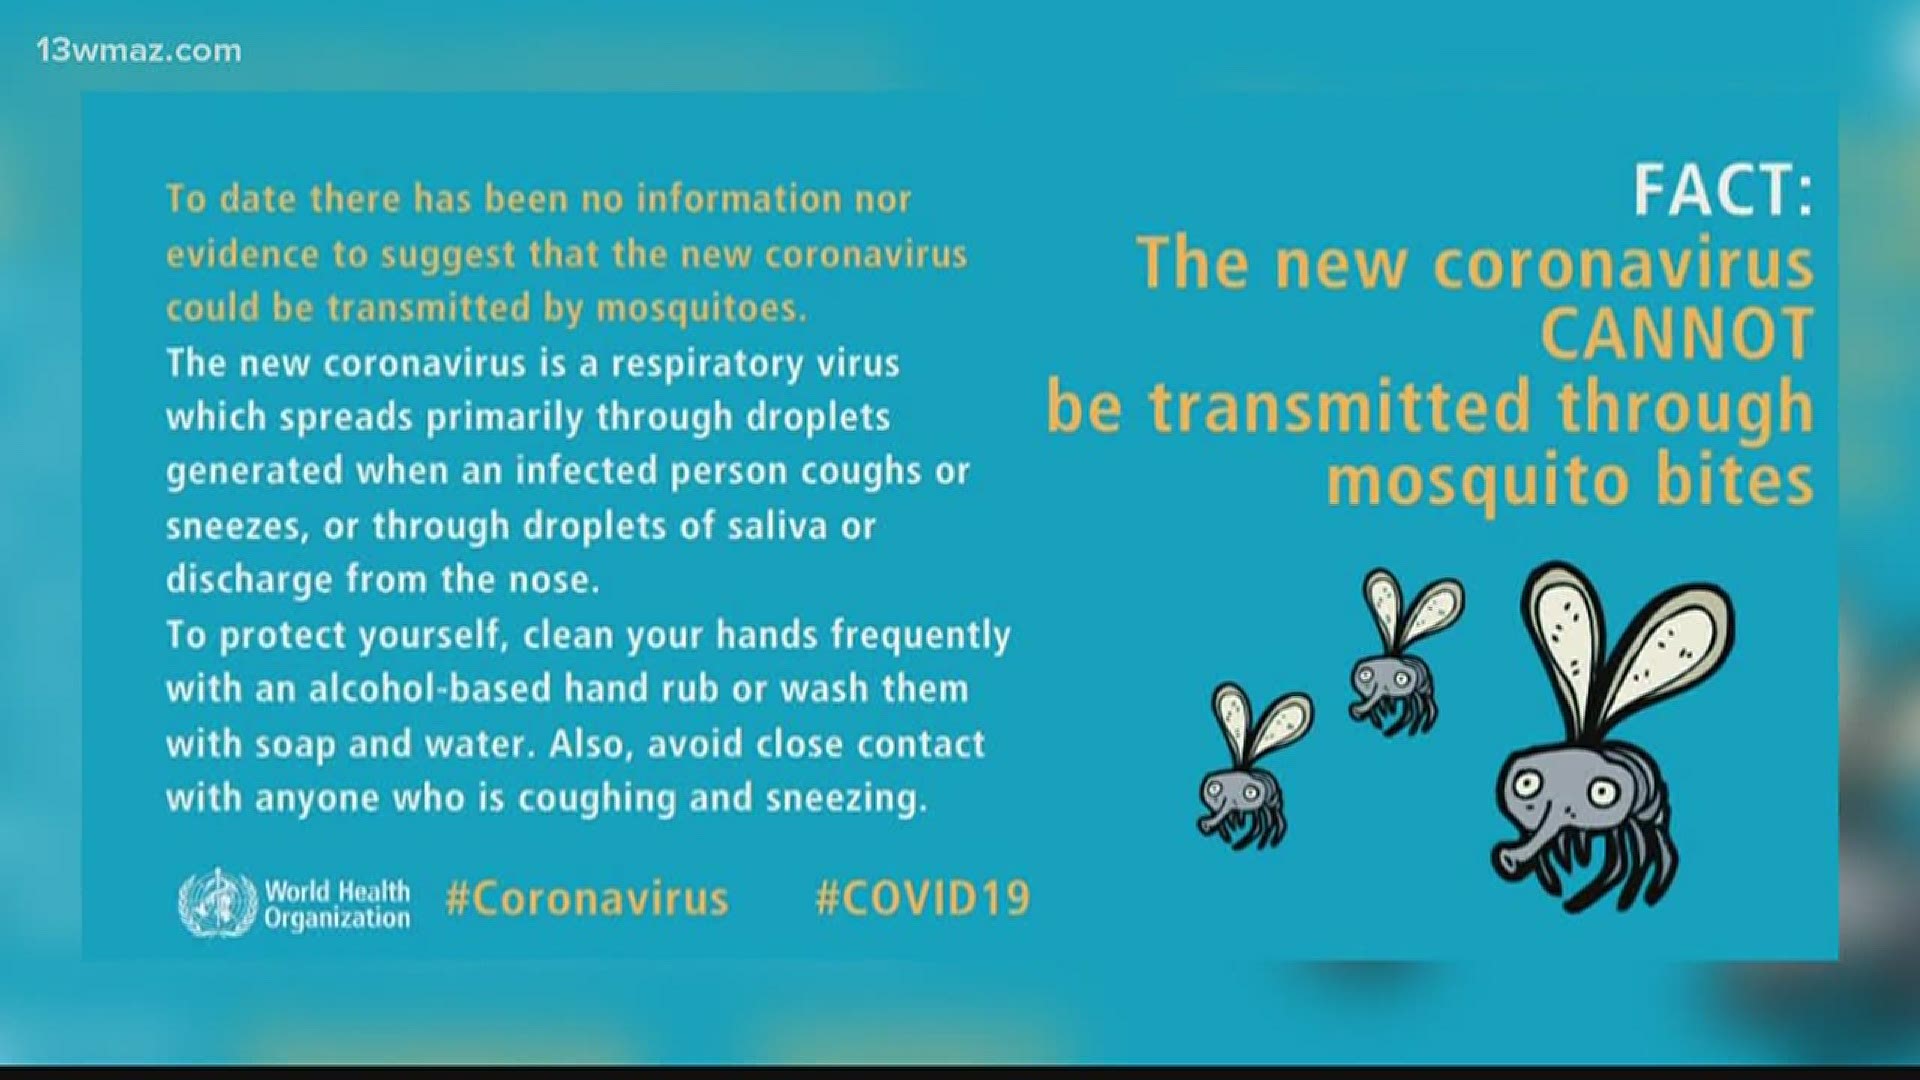 With more people going outdoors, some are wondering if you catch COVID-19 from a mosquito bite.